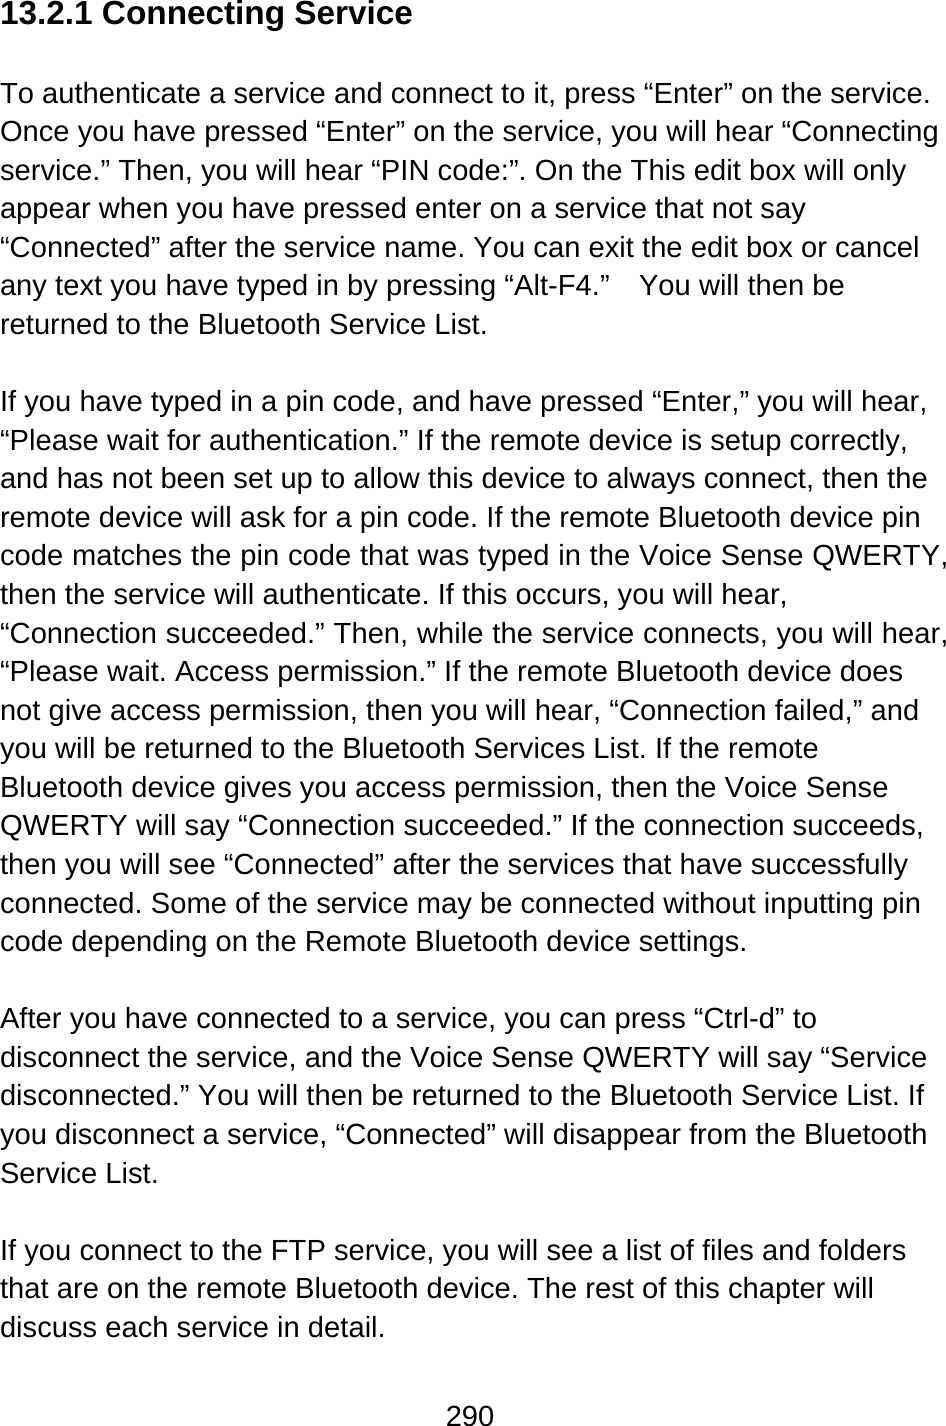 290  13.2.1 Connecting Service  To authenticate a service and connect to it, press “Enter” on the service.   Once you have pressed “Enter” on the service, you will hear “Connecting service.” Then, you will hear “PIN code:”. On the This edit box will only appear when you have pressed enter on a service that not say “Connected” after the service name. You can exit the edit box or cancel any text you have typed in by pressing “Alt-F4.”    You will then be returned to the Bluetooth Service List.  If you have typed in a pin code, and have pressed “Enter,” you will hear, “Please wait for authentication.” If the remote device is setup correctly, and has not been set up to allow this device to always connect, then the remote device will ask for a pin code. If the remote Bluetooth device pin code matches the pin code that was typed in the Voice Sense QWERTY, then the service will authenticate. If this occurs, you will hear, “Connection succeeded.” Then, while the service connects, you will hear, “Please wait. Access permission.” If the remote Bluetooth device does not give access permission, then you will hear, “Connection failed,” and you will be returned to the Bluetooth Services List. If the remote Bluetooth device gives you access permission, then the Voice Sense QWERTY will say “Connection succeeded.” If the connection succeeds, then you will see “Connected” after the services that have successfully connected. Some of the service may be connected without inputting pin code depending on the Remote Bluetooth device settings.  After you have connected to a service, you can press “Ctrl-d” to disconnect the service, and the Voice Sense QWERTY will say “Service disconnected.” You will then be returned to the Bluetooth Service List. If you disconnect a service, “Connected” will disappear from the Bluetooth Service List.  If you connect to the FTP service, you will see a list of files and folders that are on the remote Bluetooth device. The rest of this chapter will discuss each service in detail.  